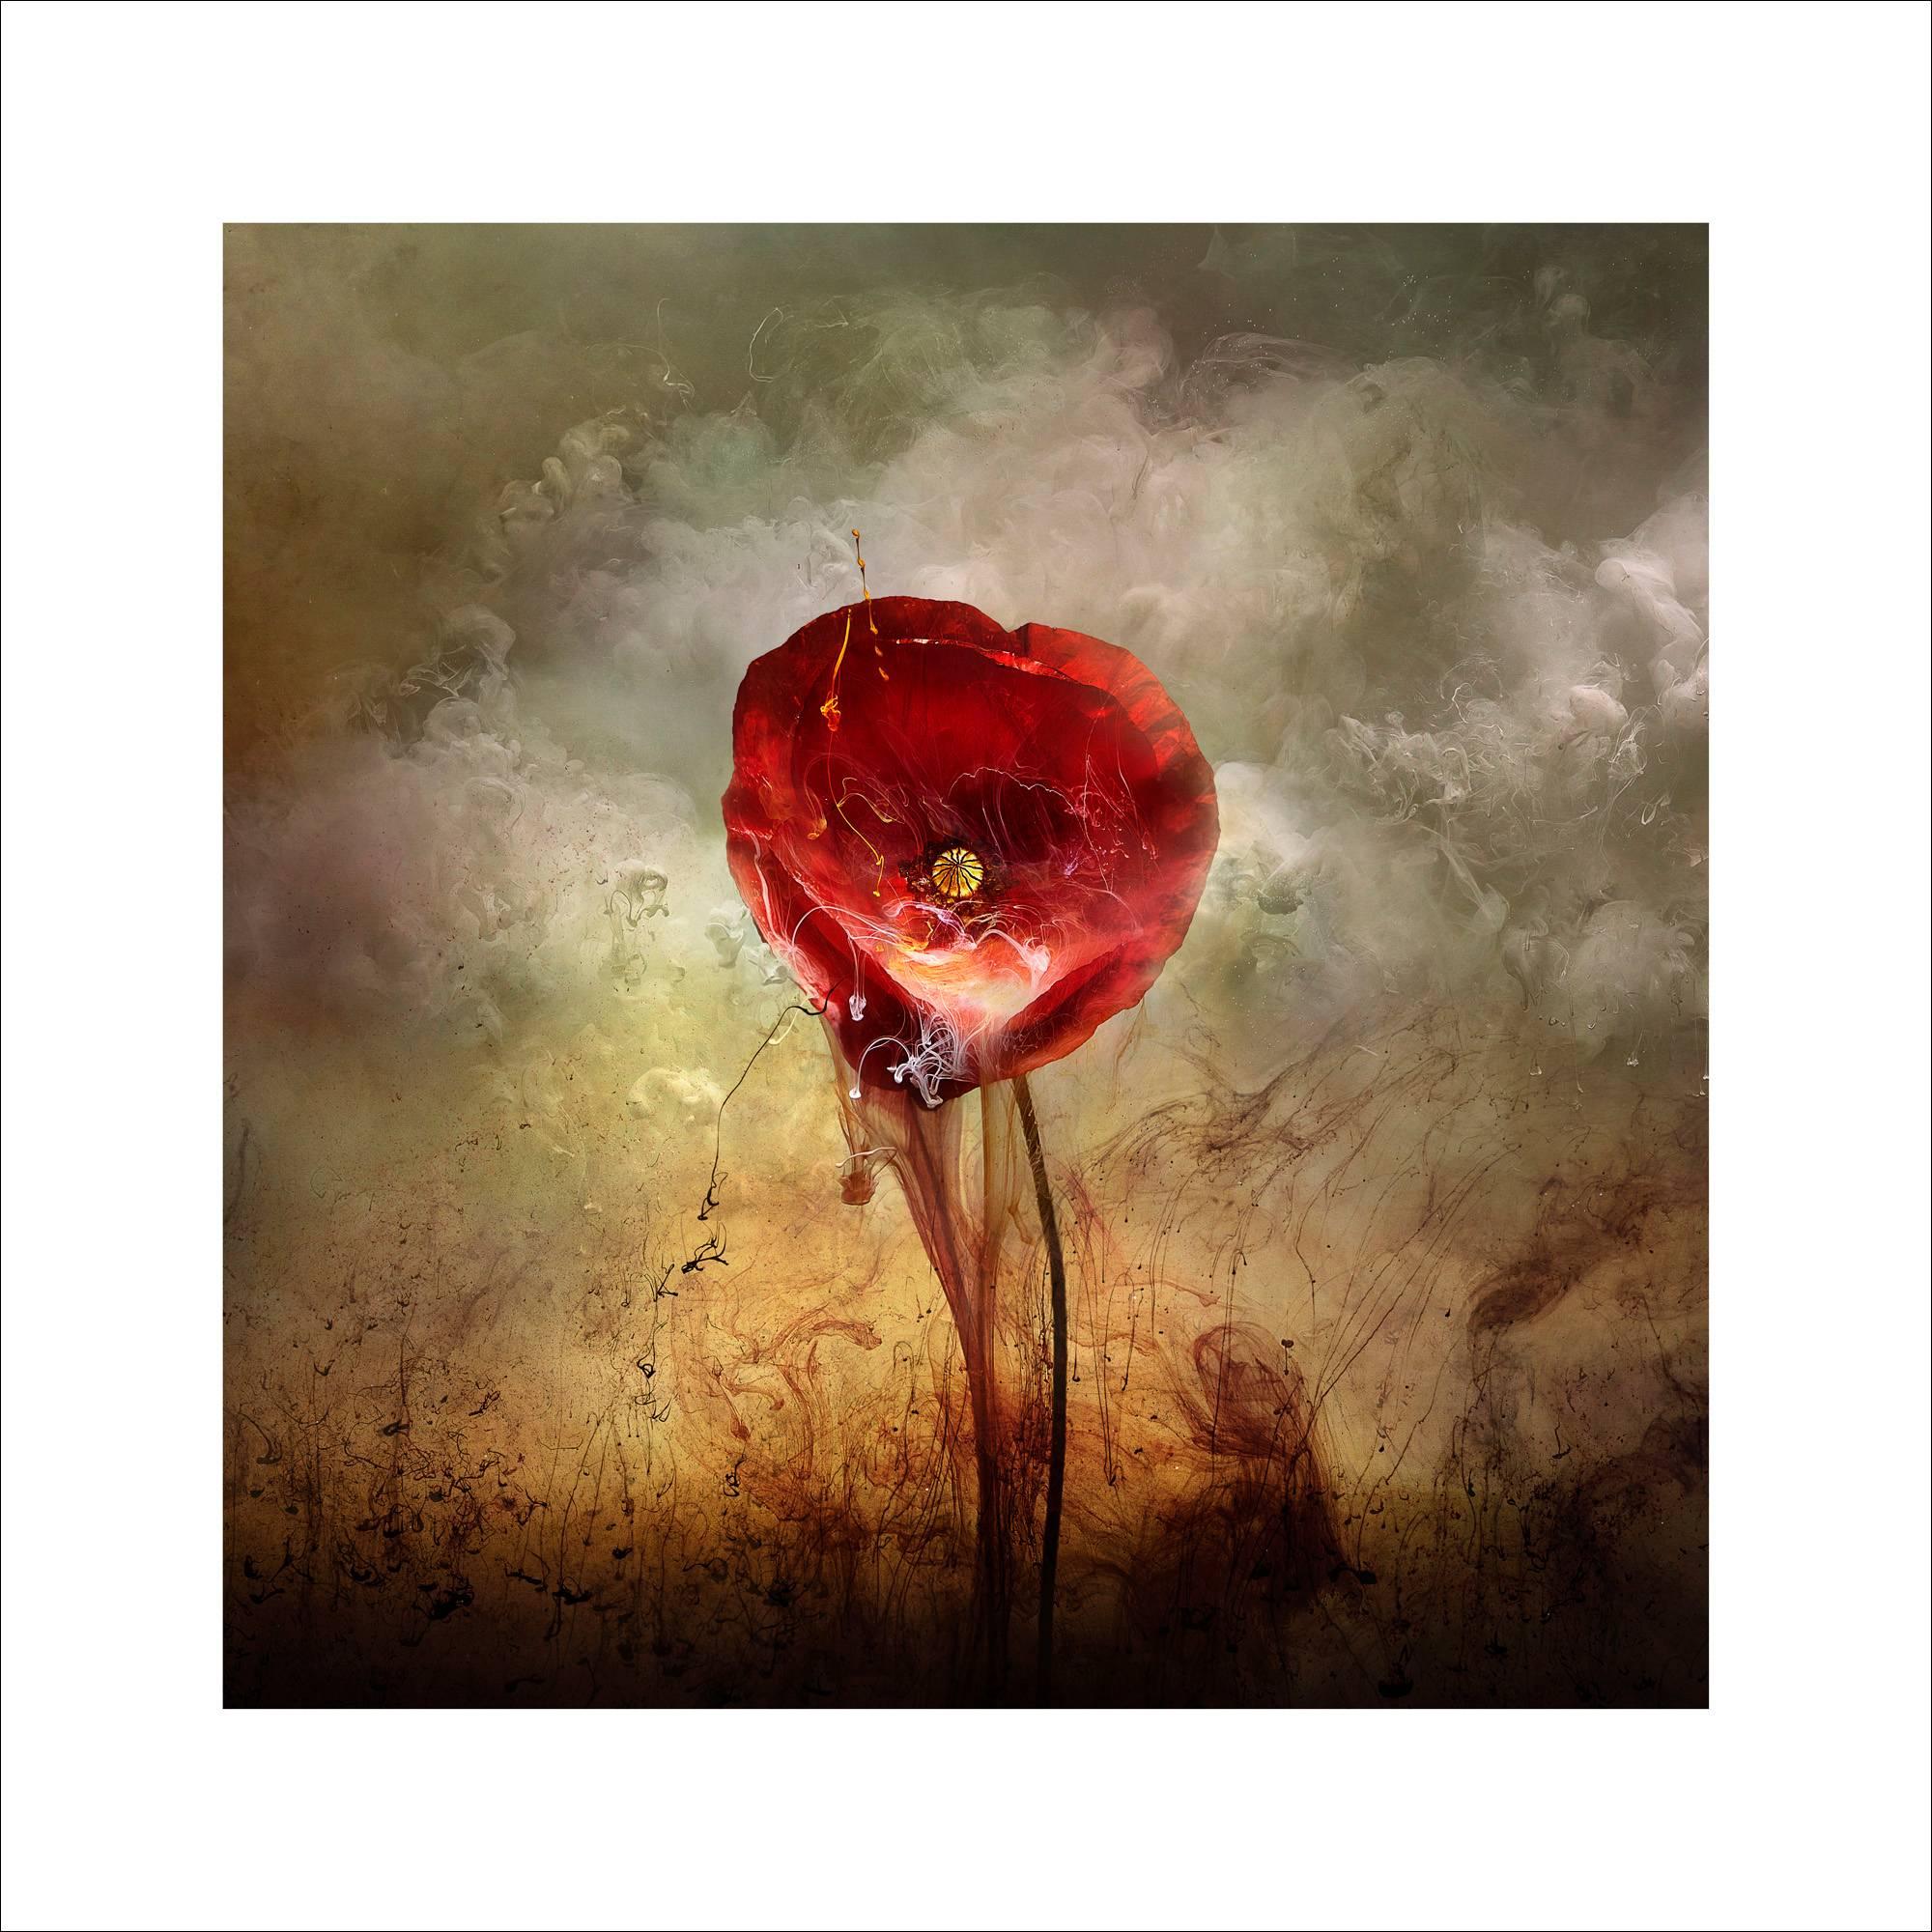 War Poppy 4, 2015.
Stochastic pigment ink print.
Edition of 8 + 2 APs.
39 3/8 x 39 3/8 in. (100cm x 100 cm.)

Pricing is for print only. Framing is available for an additional fee. Please contact for more information.

On June 21, Revell’s